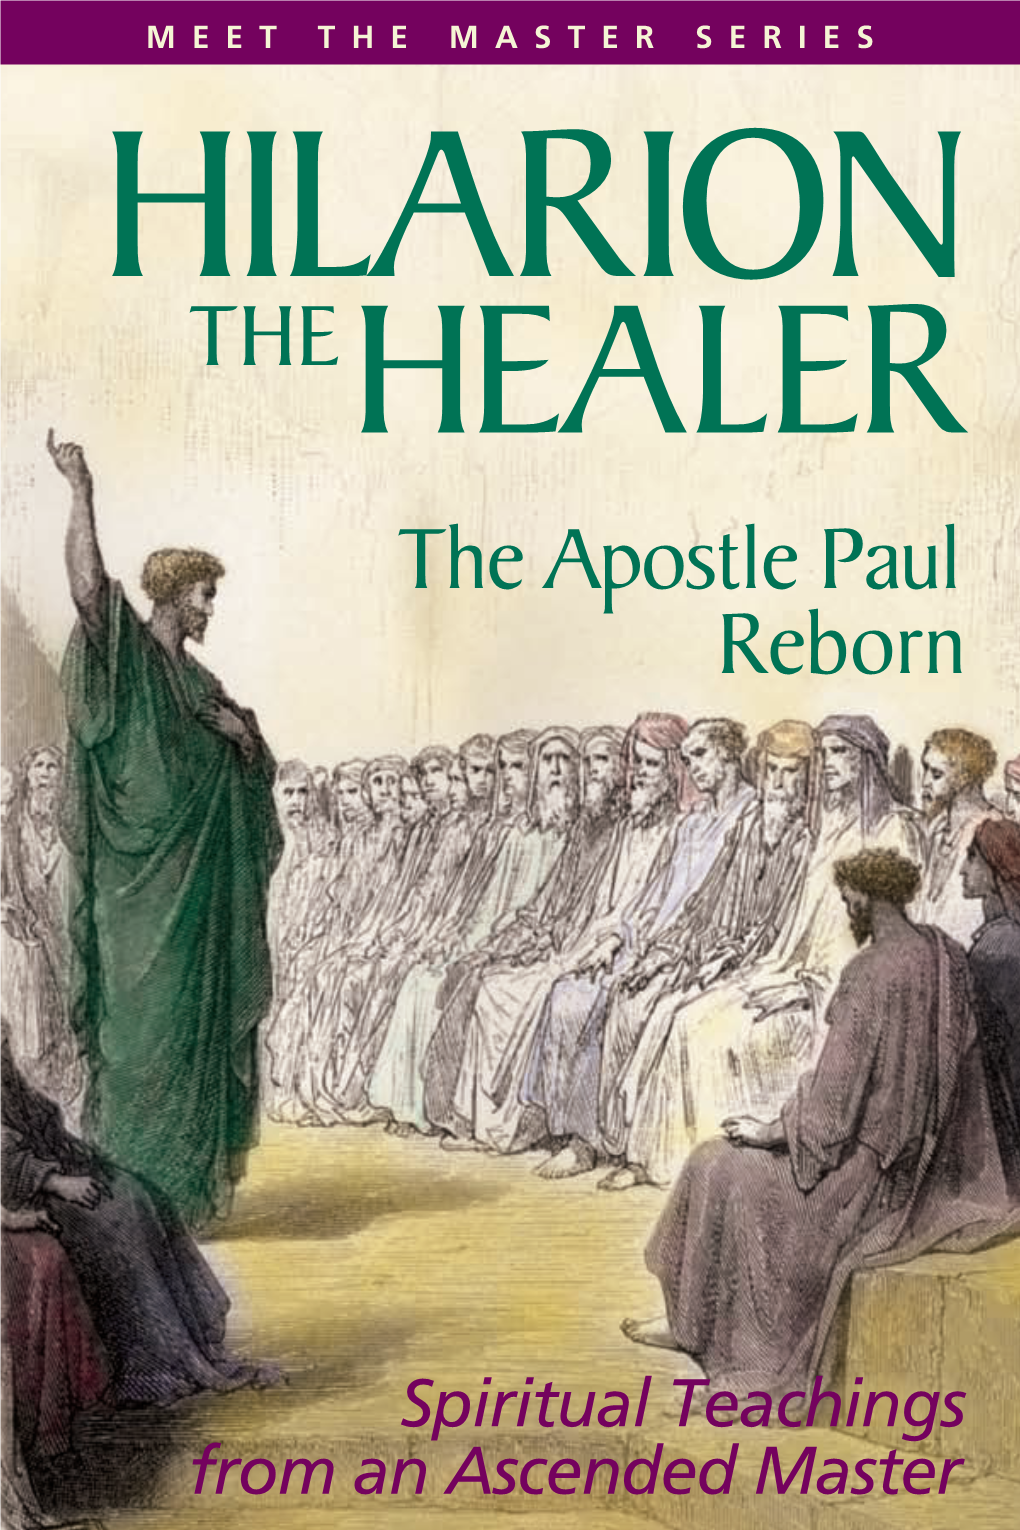 HILARION the Healer THEHEALER SPIRITUALITY / PERSONAL GROWTH the Missionary Journeys of the Apostle Paul